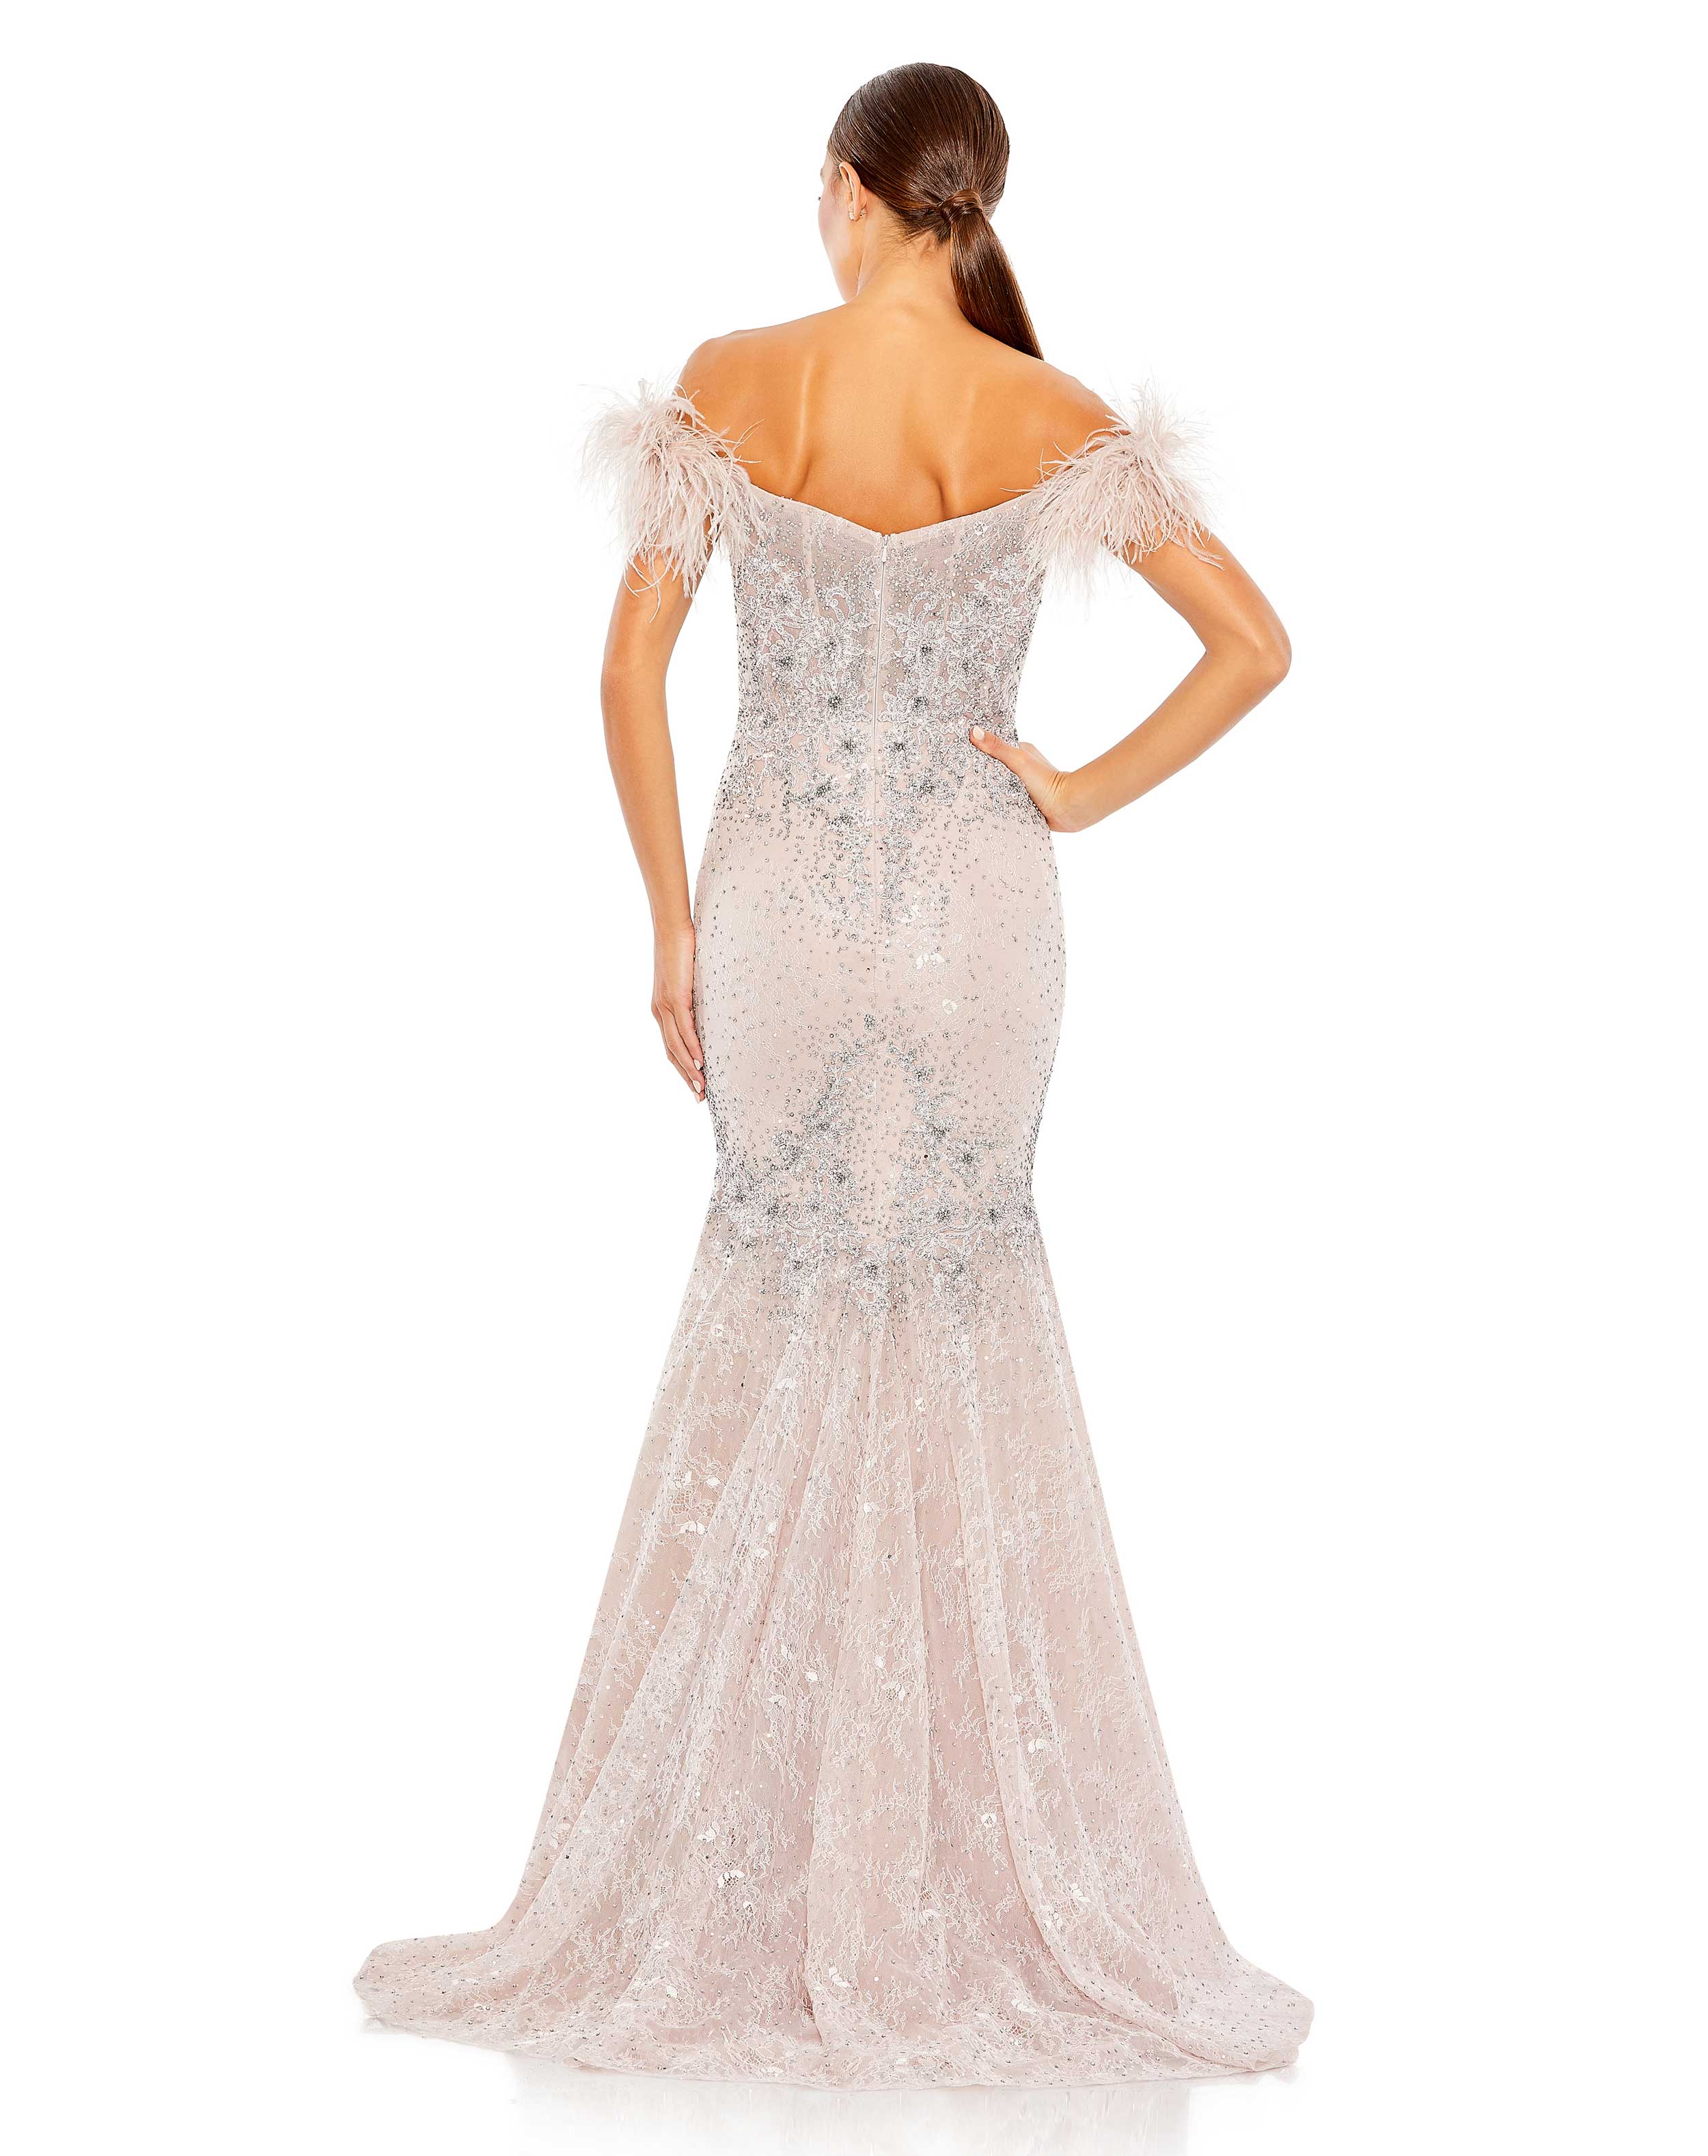 Feathered Crystal Embellished Sleeveless Gown